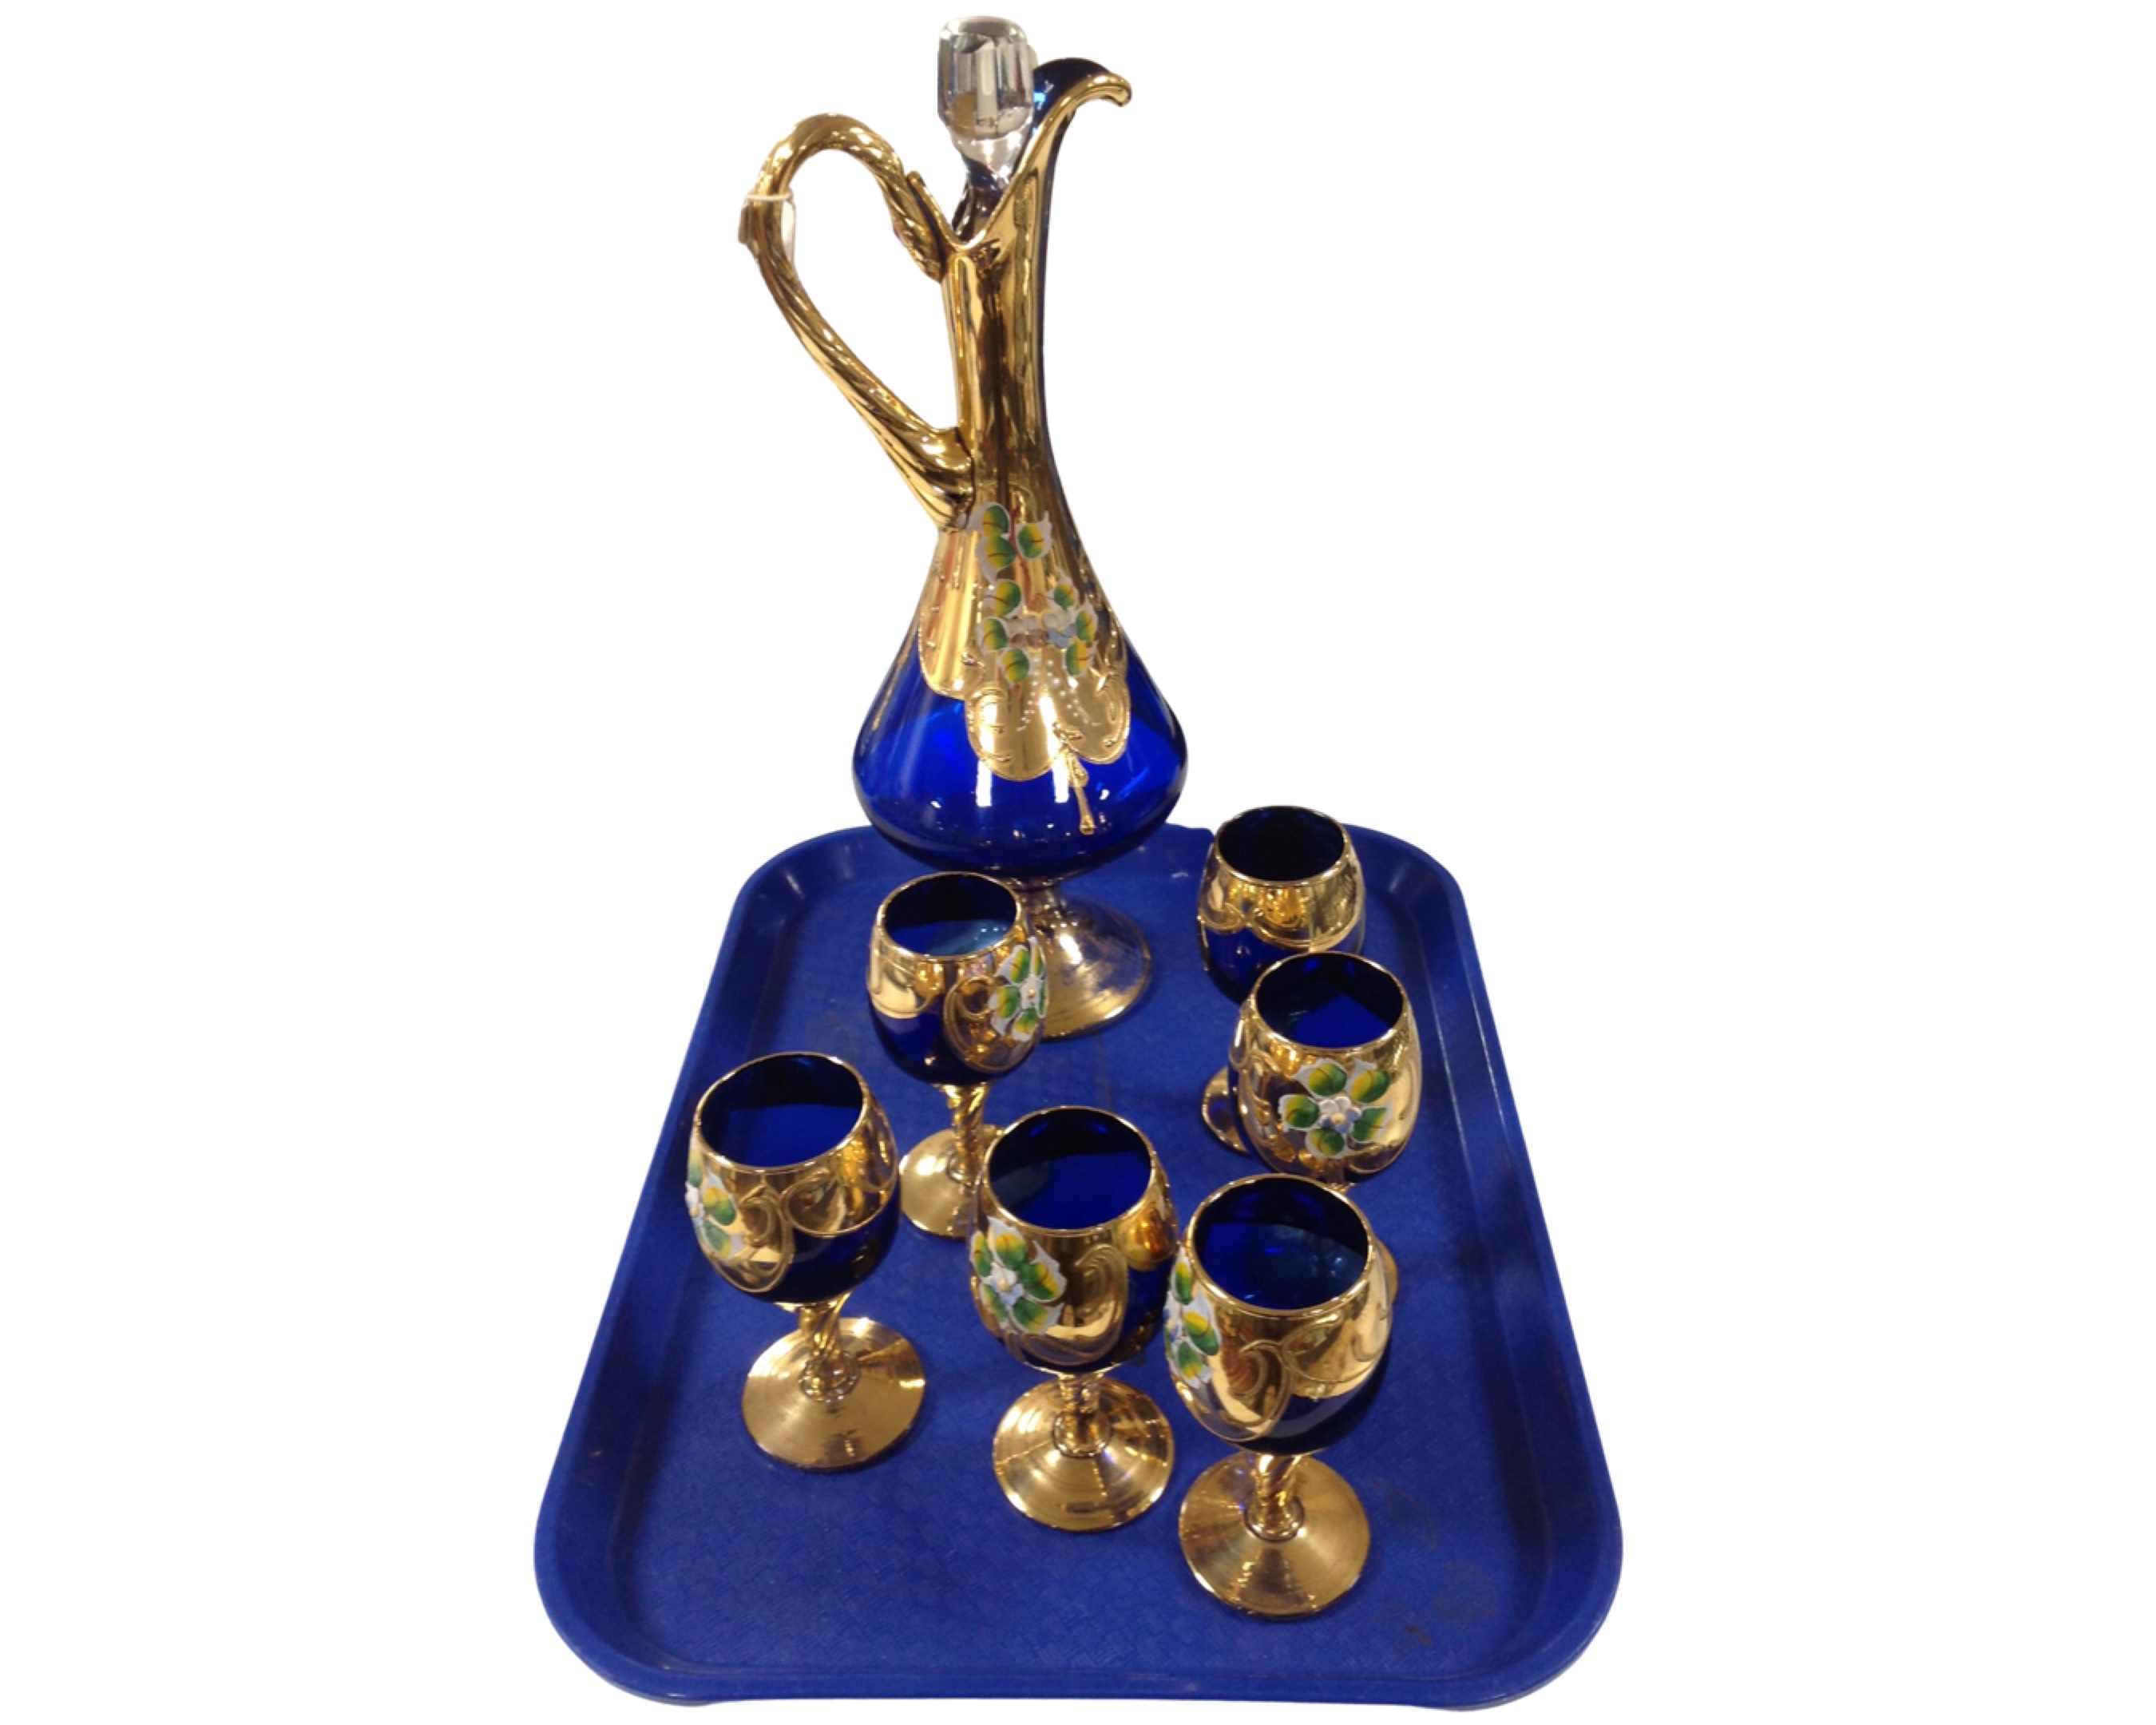 A Murano seven-piece decanter set in deep blue glass, with enamelled floral decoration on gilt,